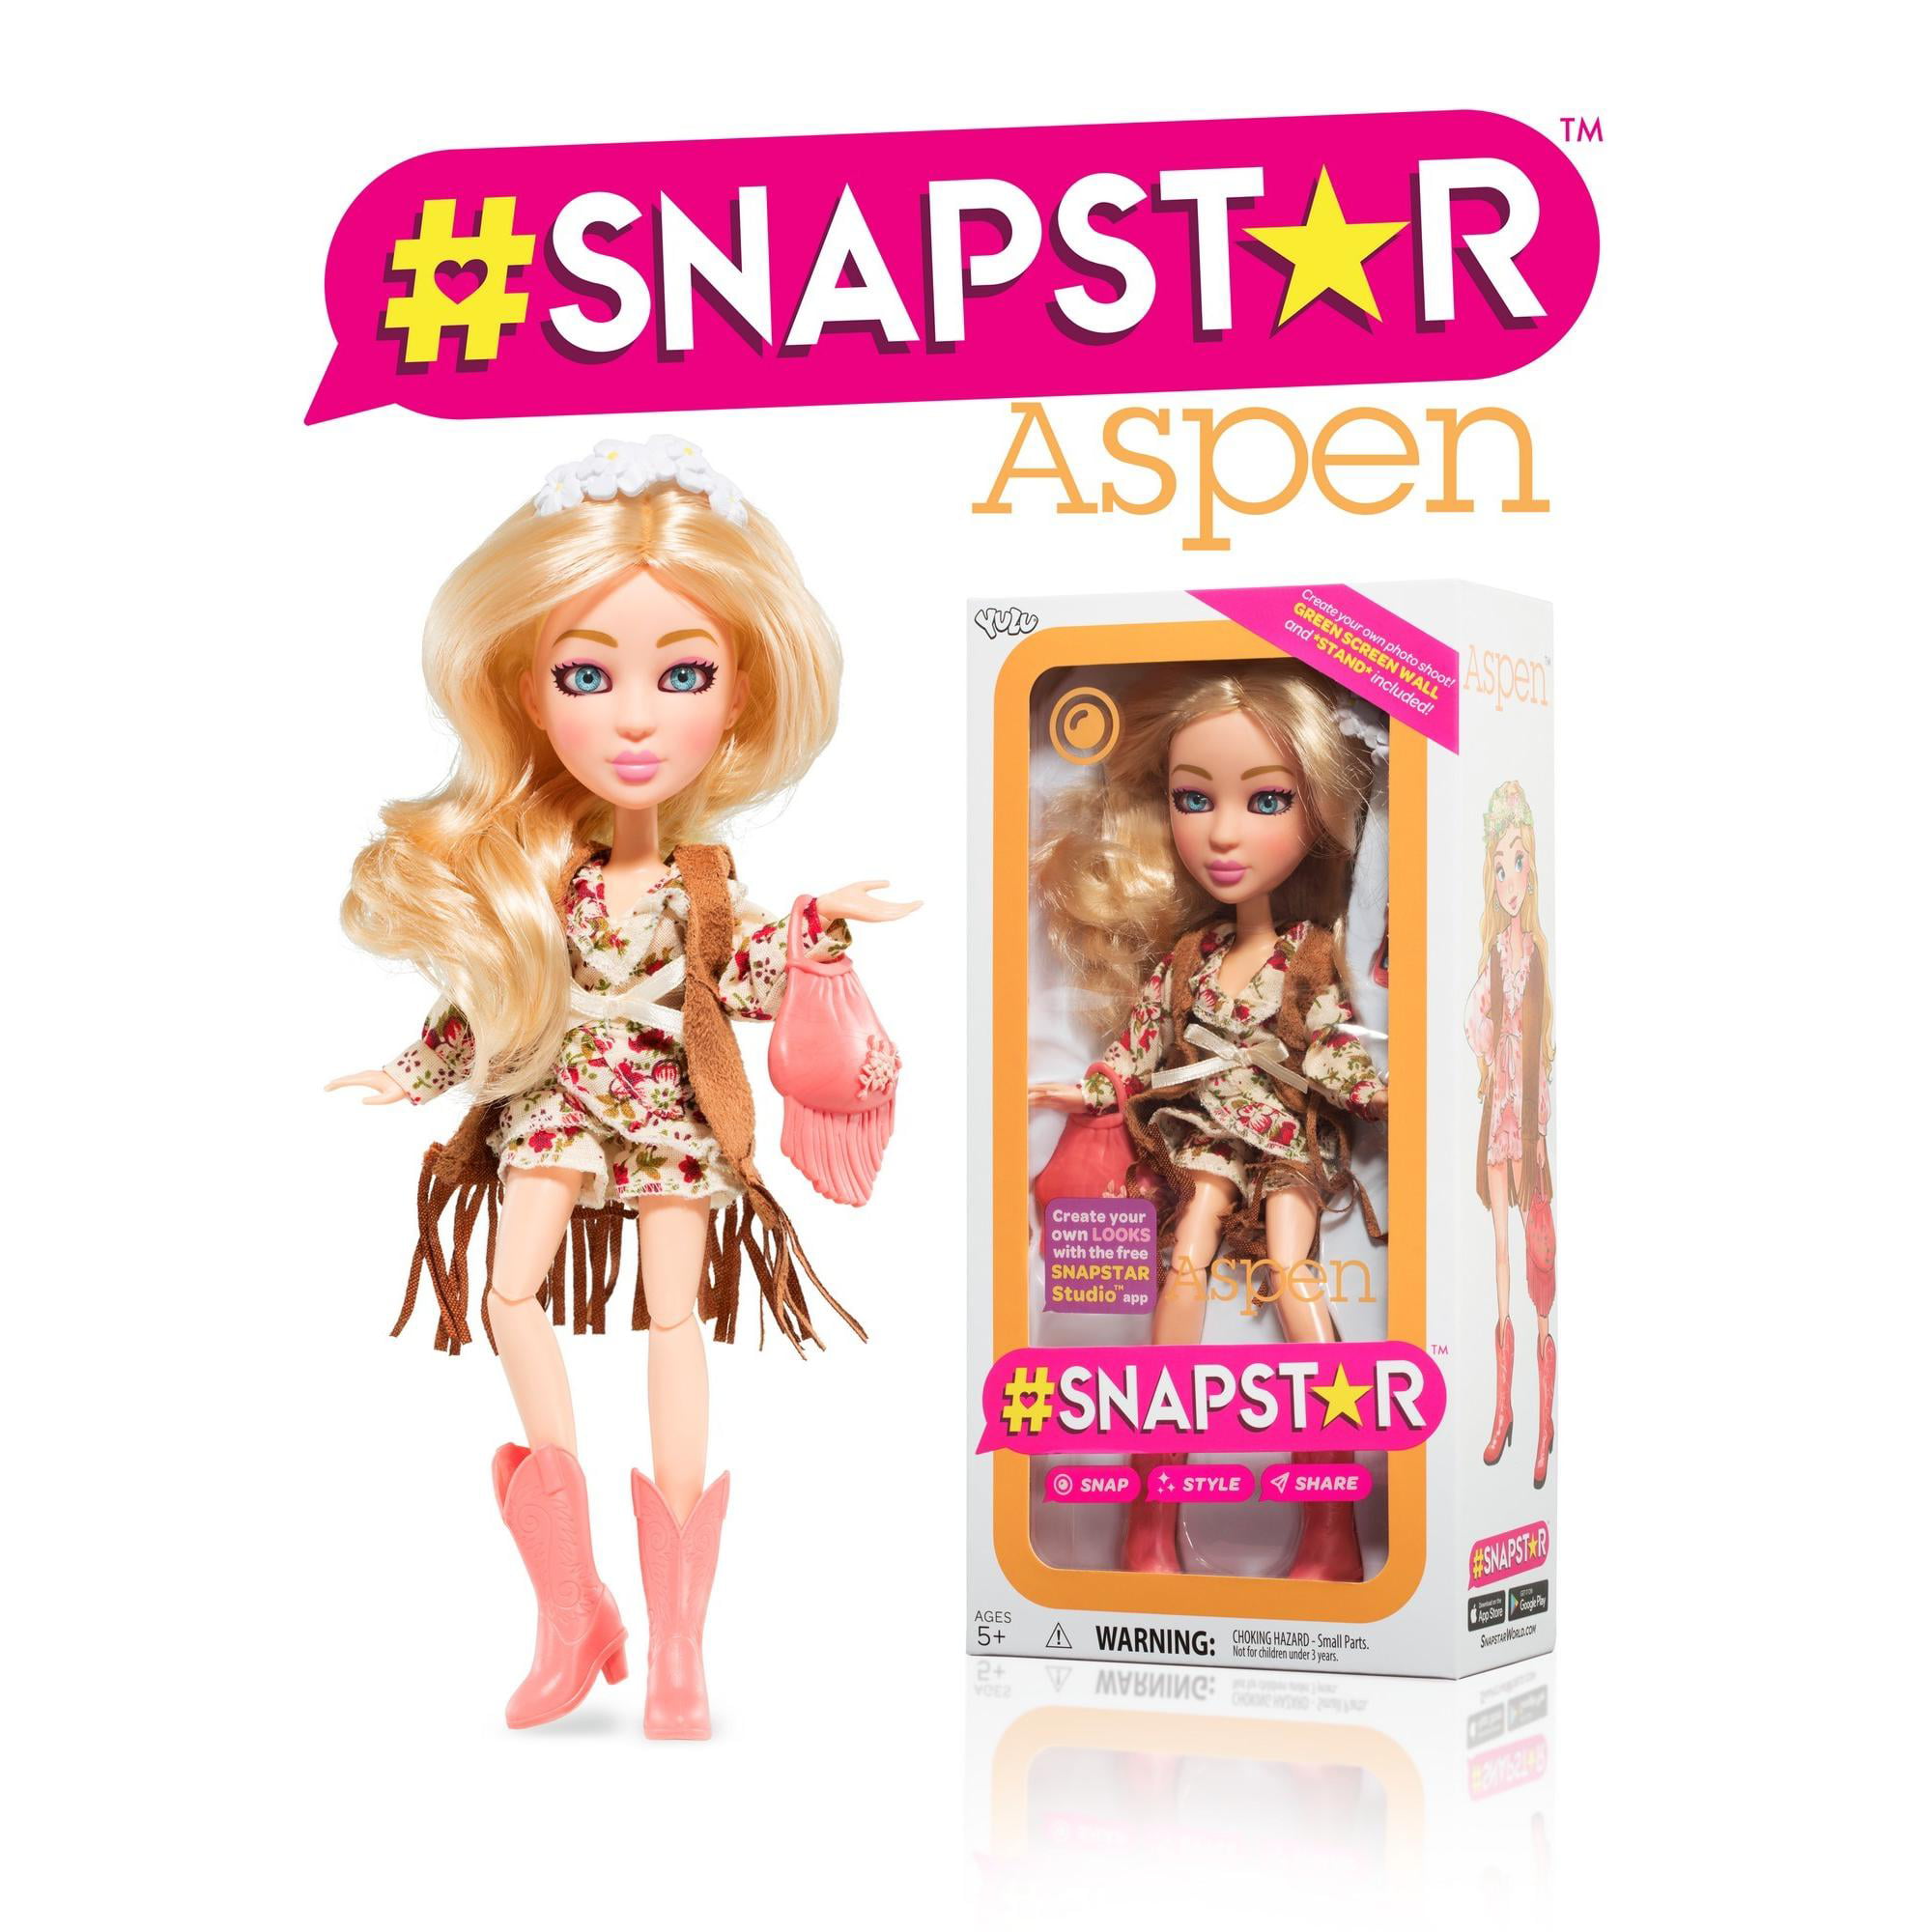 Snapstar Aspen Doll Magic Photo Wall & Stand Set Snap Style Share New Girls Toy 